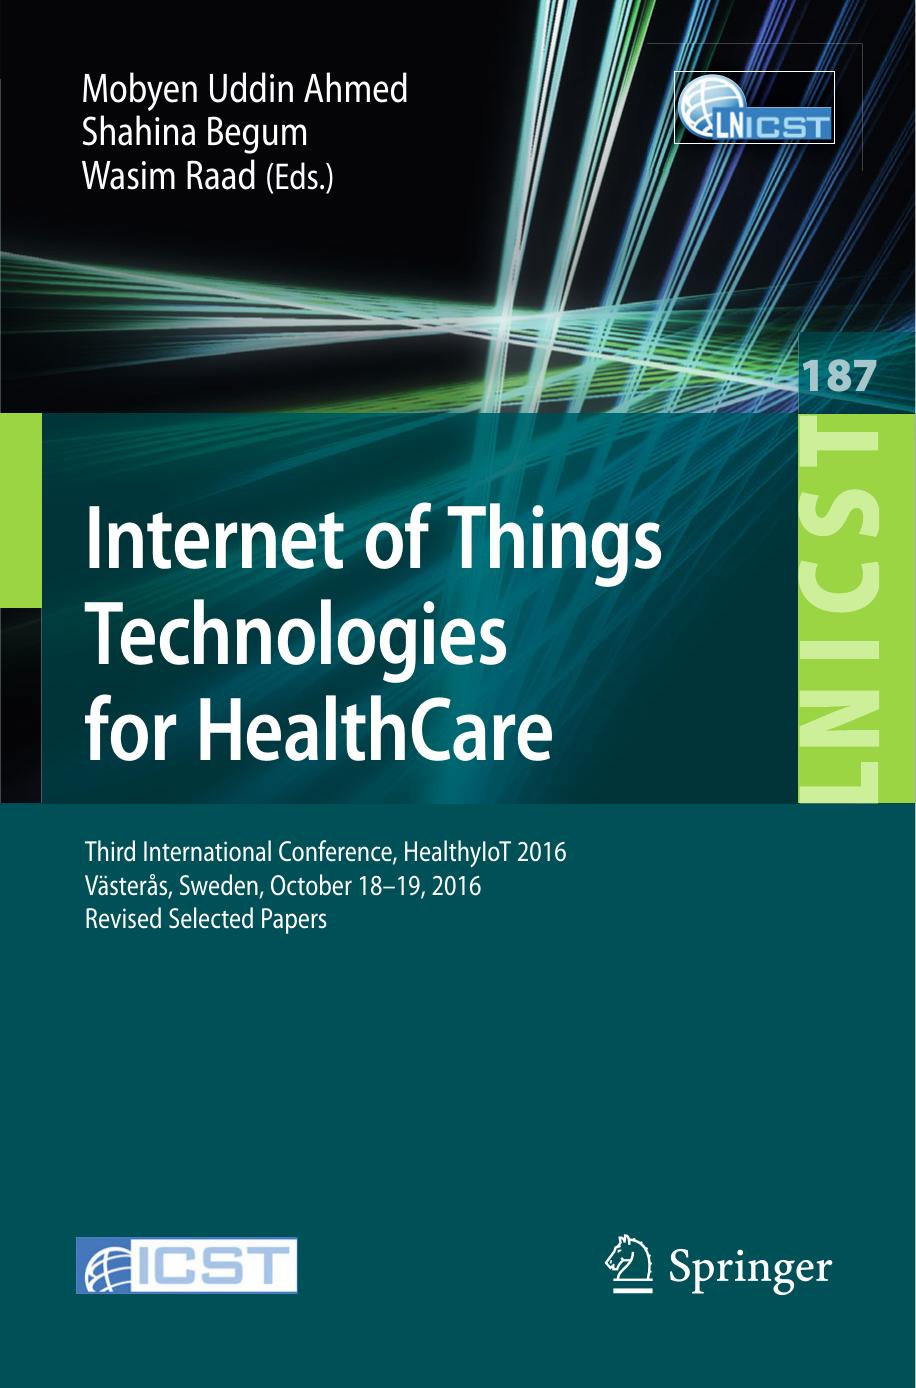 Internet of Things Technologies for HealthCare: Third International Conference, HealthyIoT 2016, Västerås, Sweden, October 18-19, 2016, Revised Selected Papers